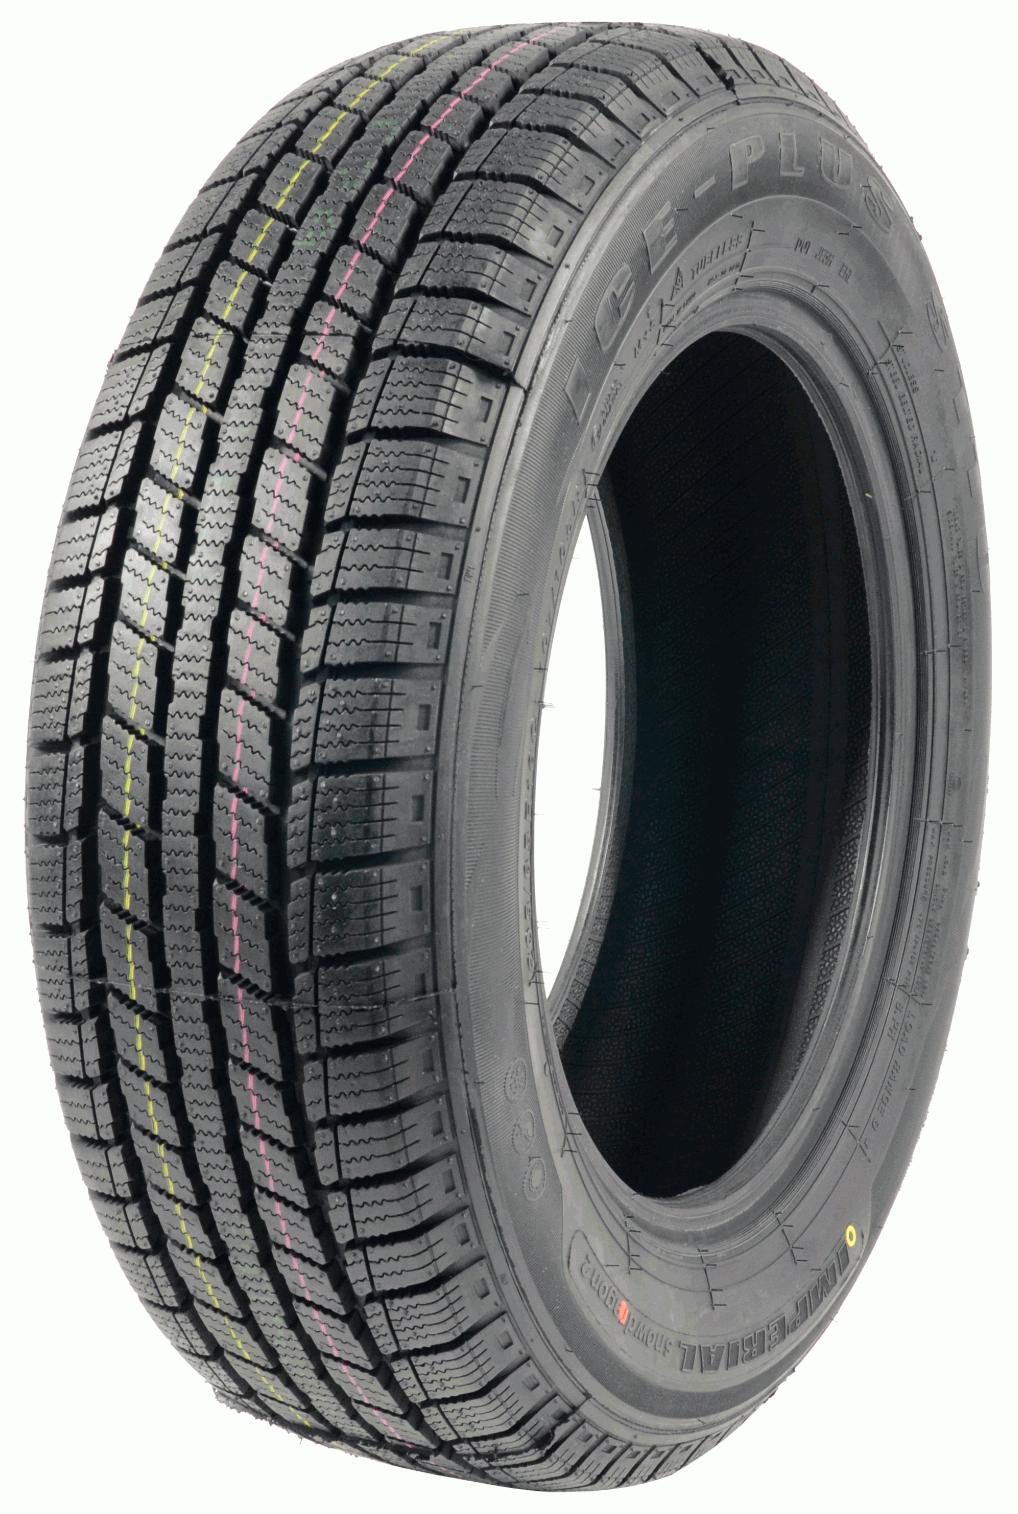 Imperial Snowdragon 2 - Tire Tests Reviews and